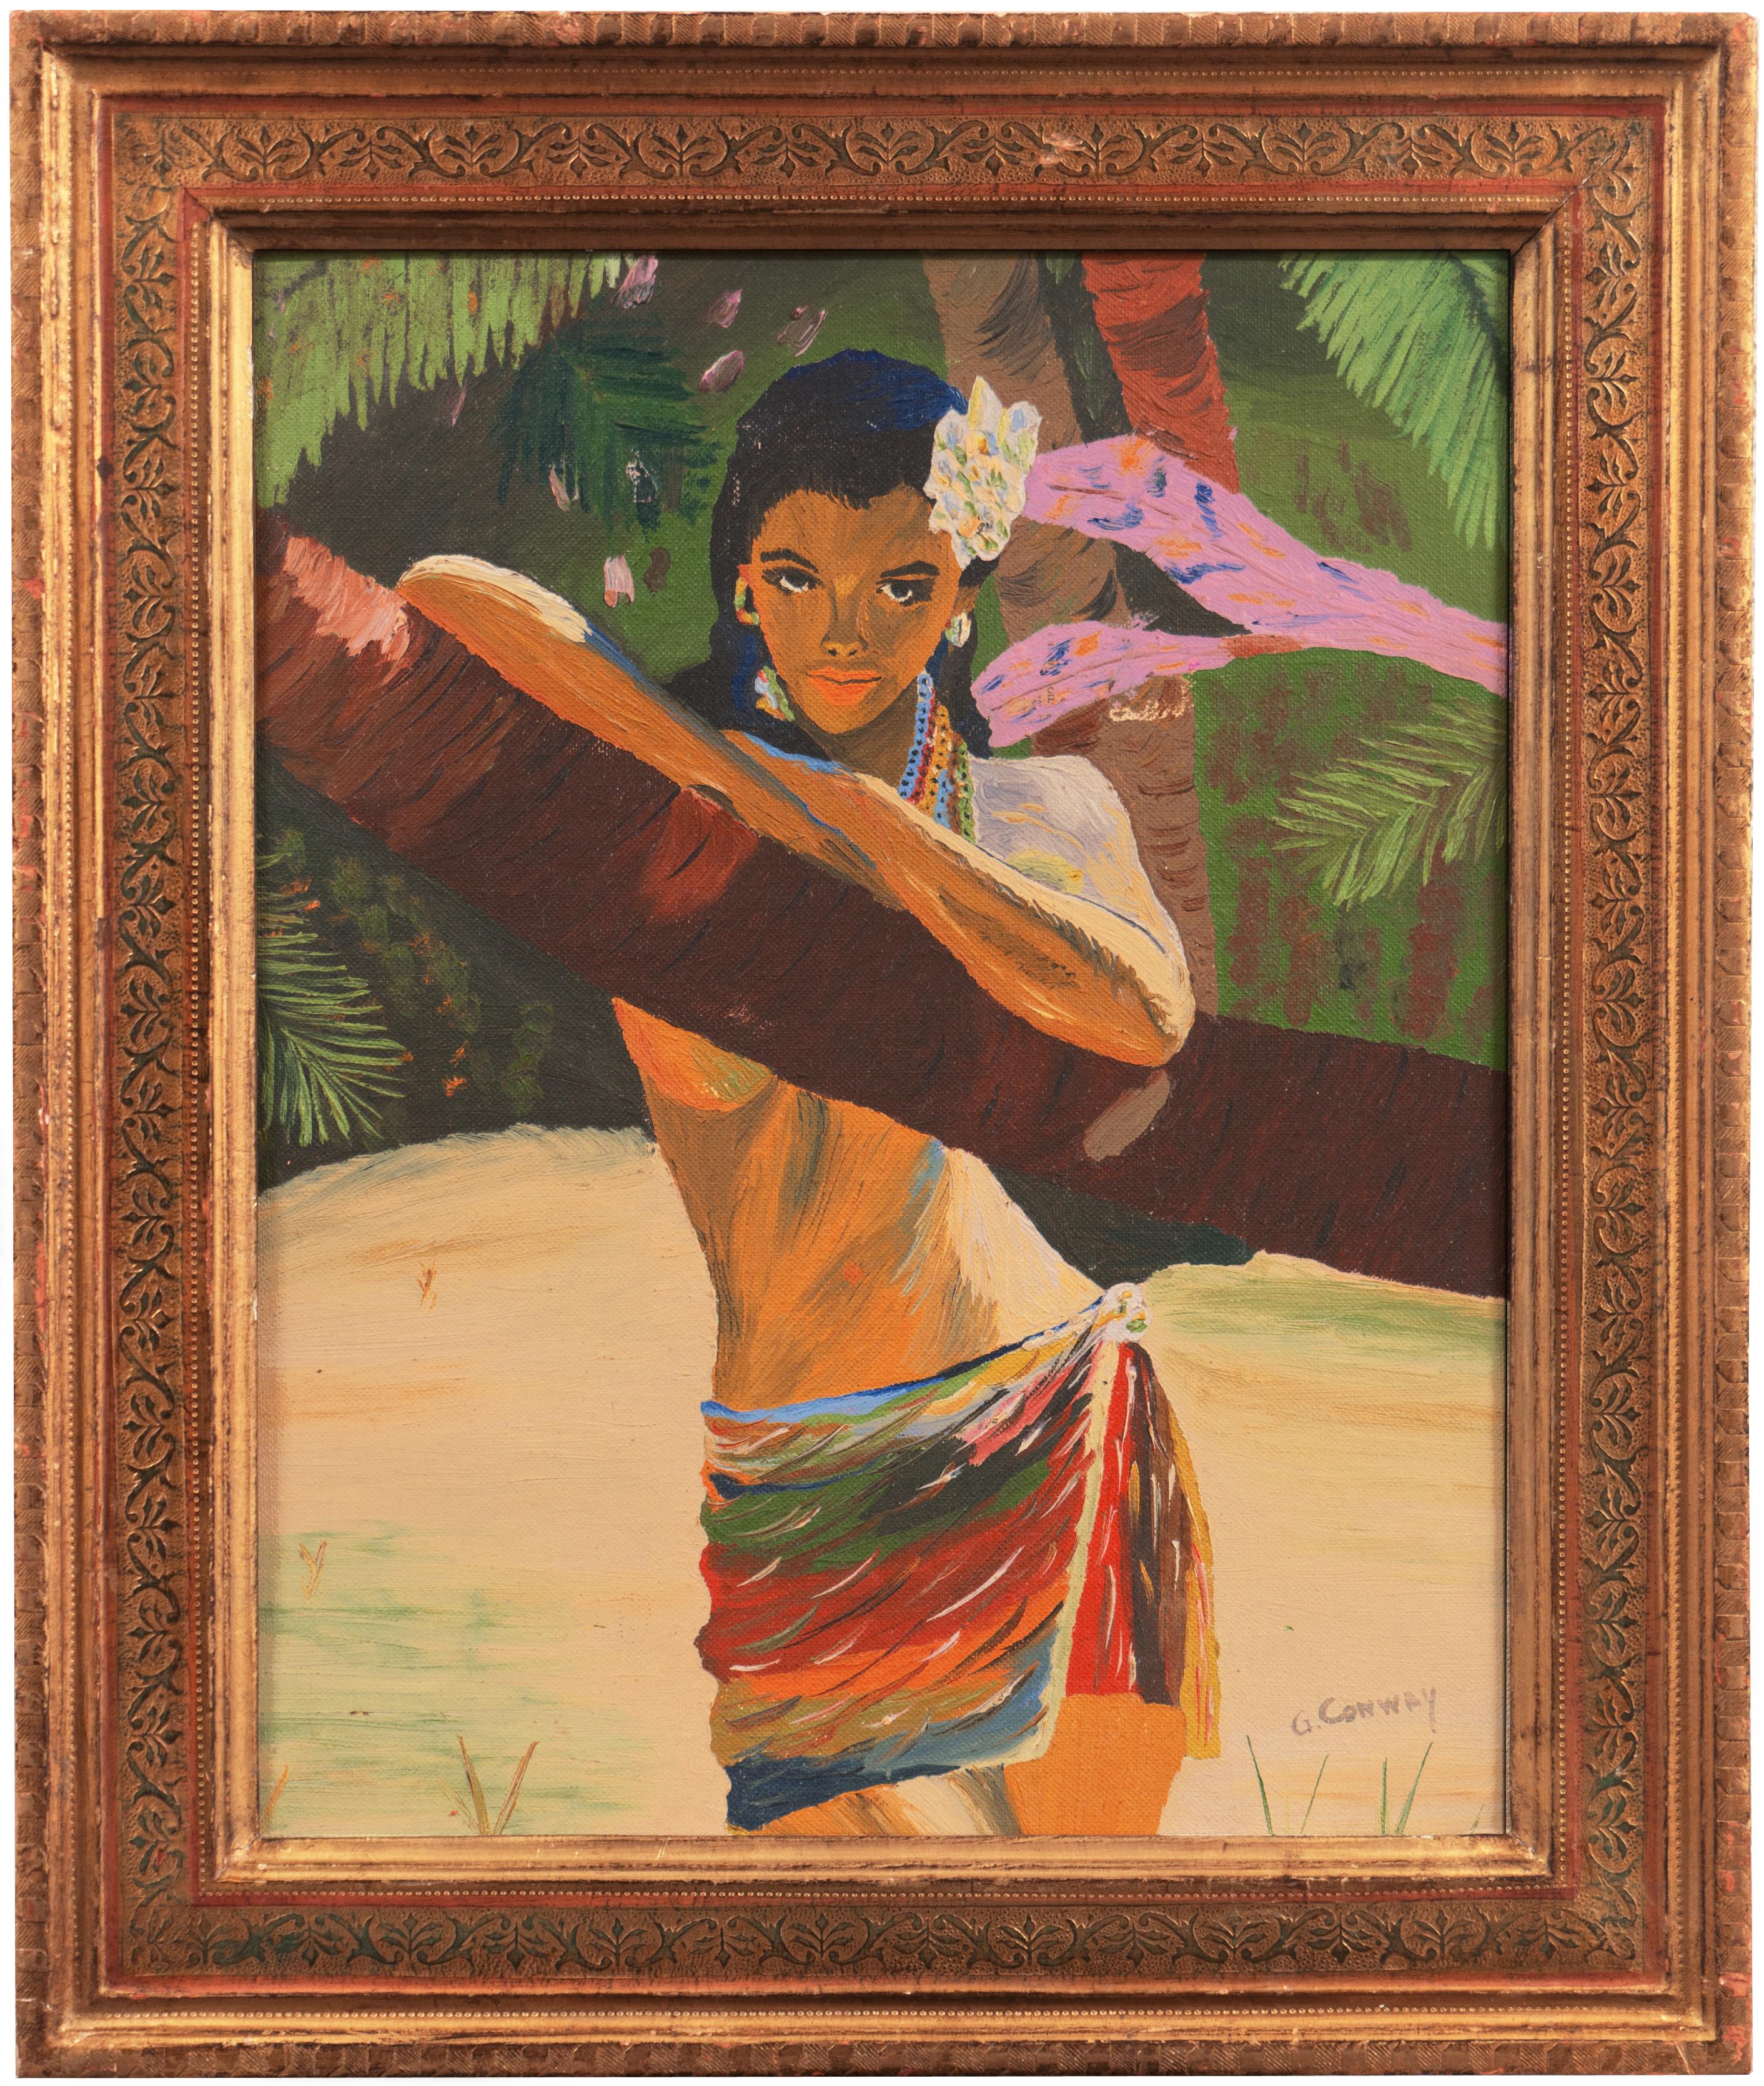 'Tropical Beach Beauty', Long Beach Art Association, Fiji, Pacific, South Seas - Painting by Gregory Conway